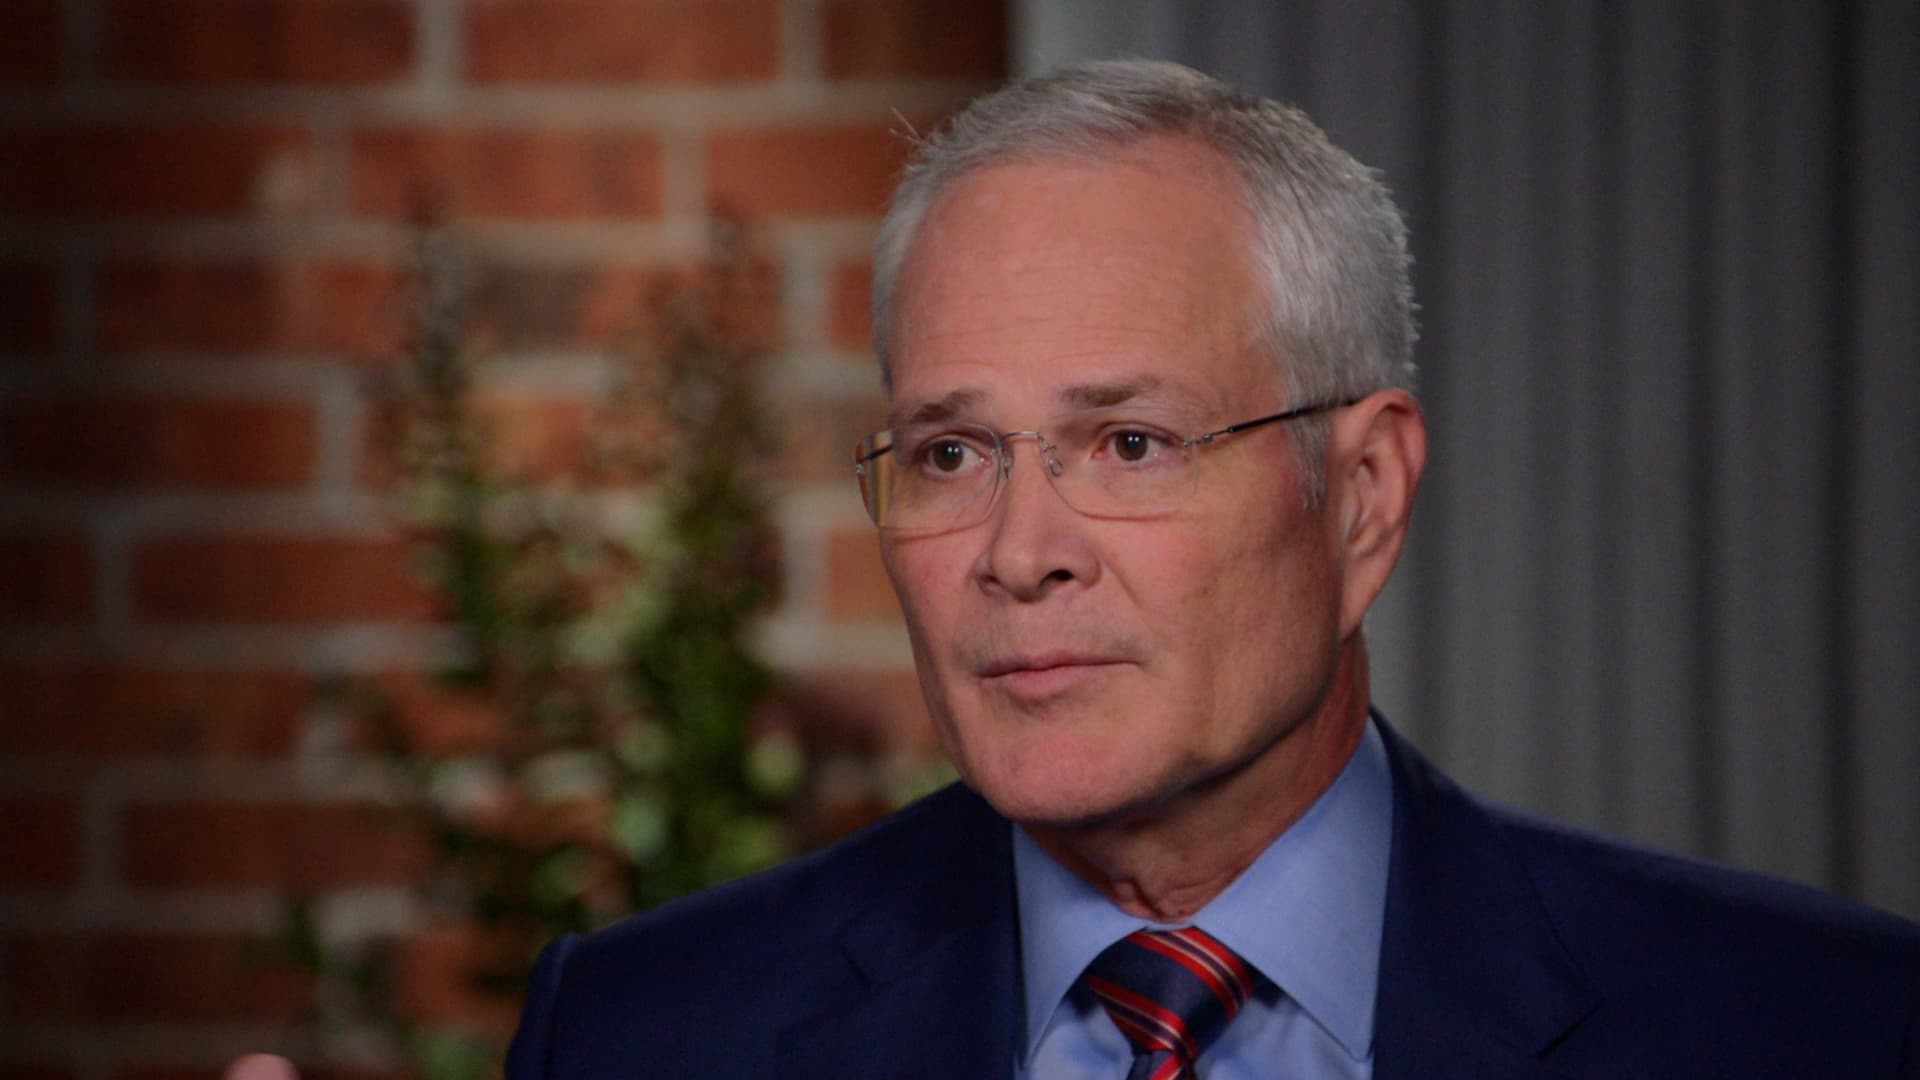 Exxon Mobil CEO Darren Woods on energy conversion, gas prices